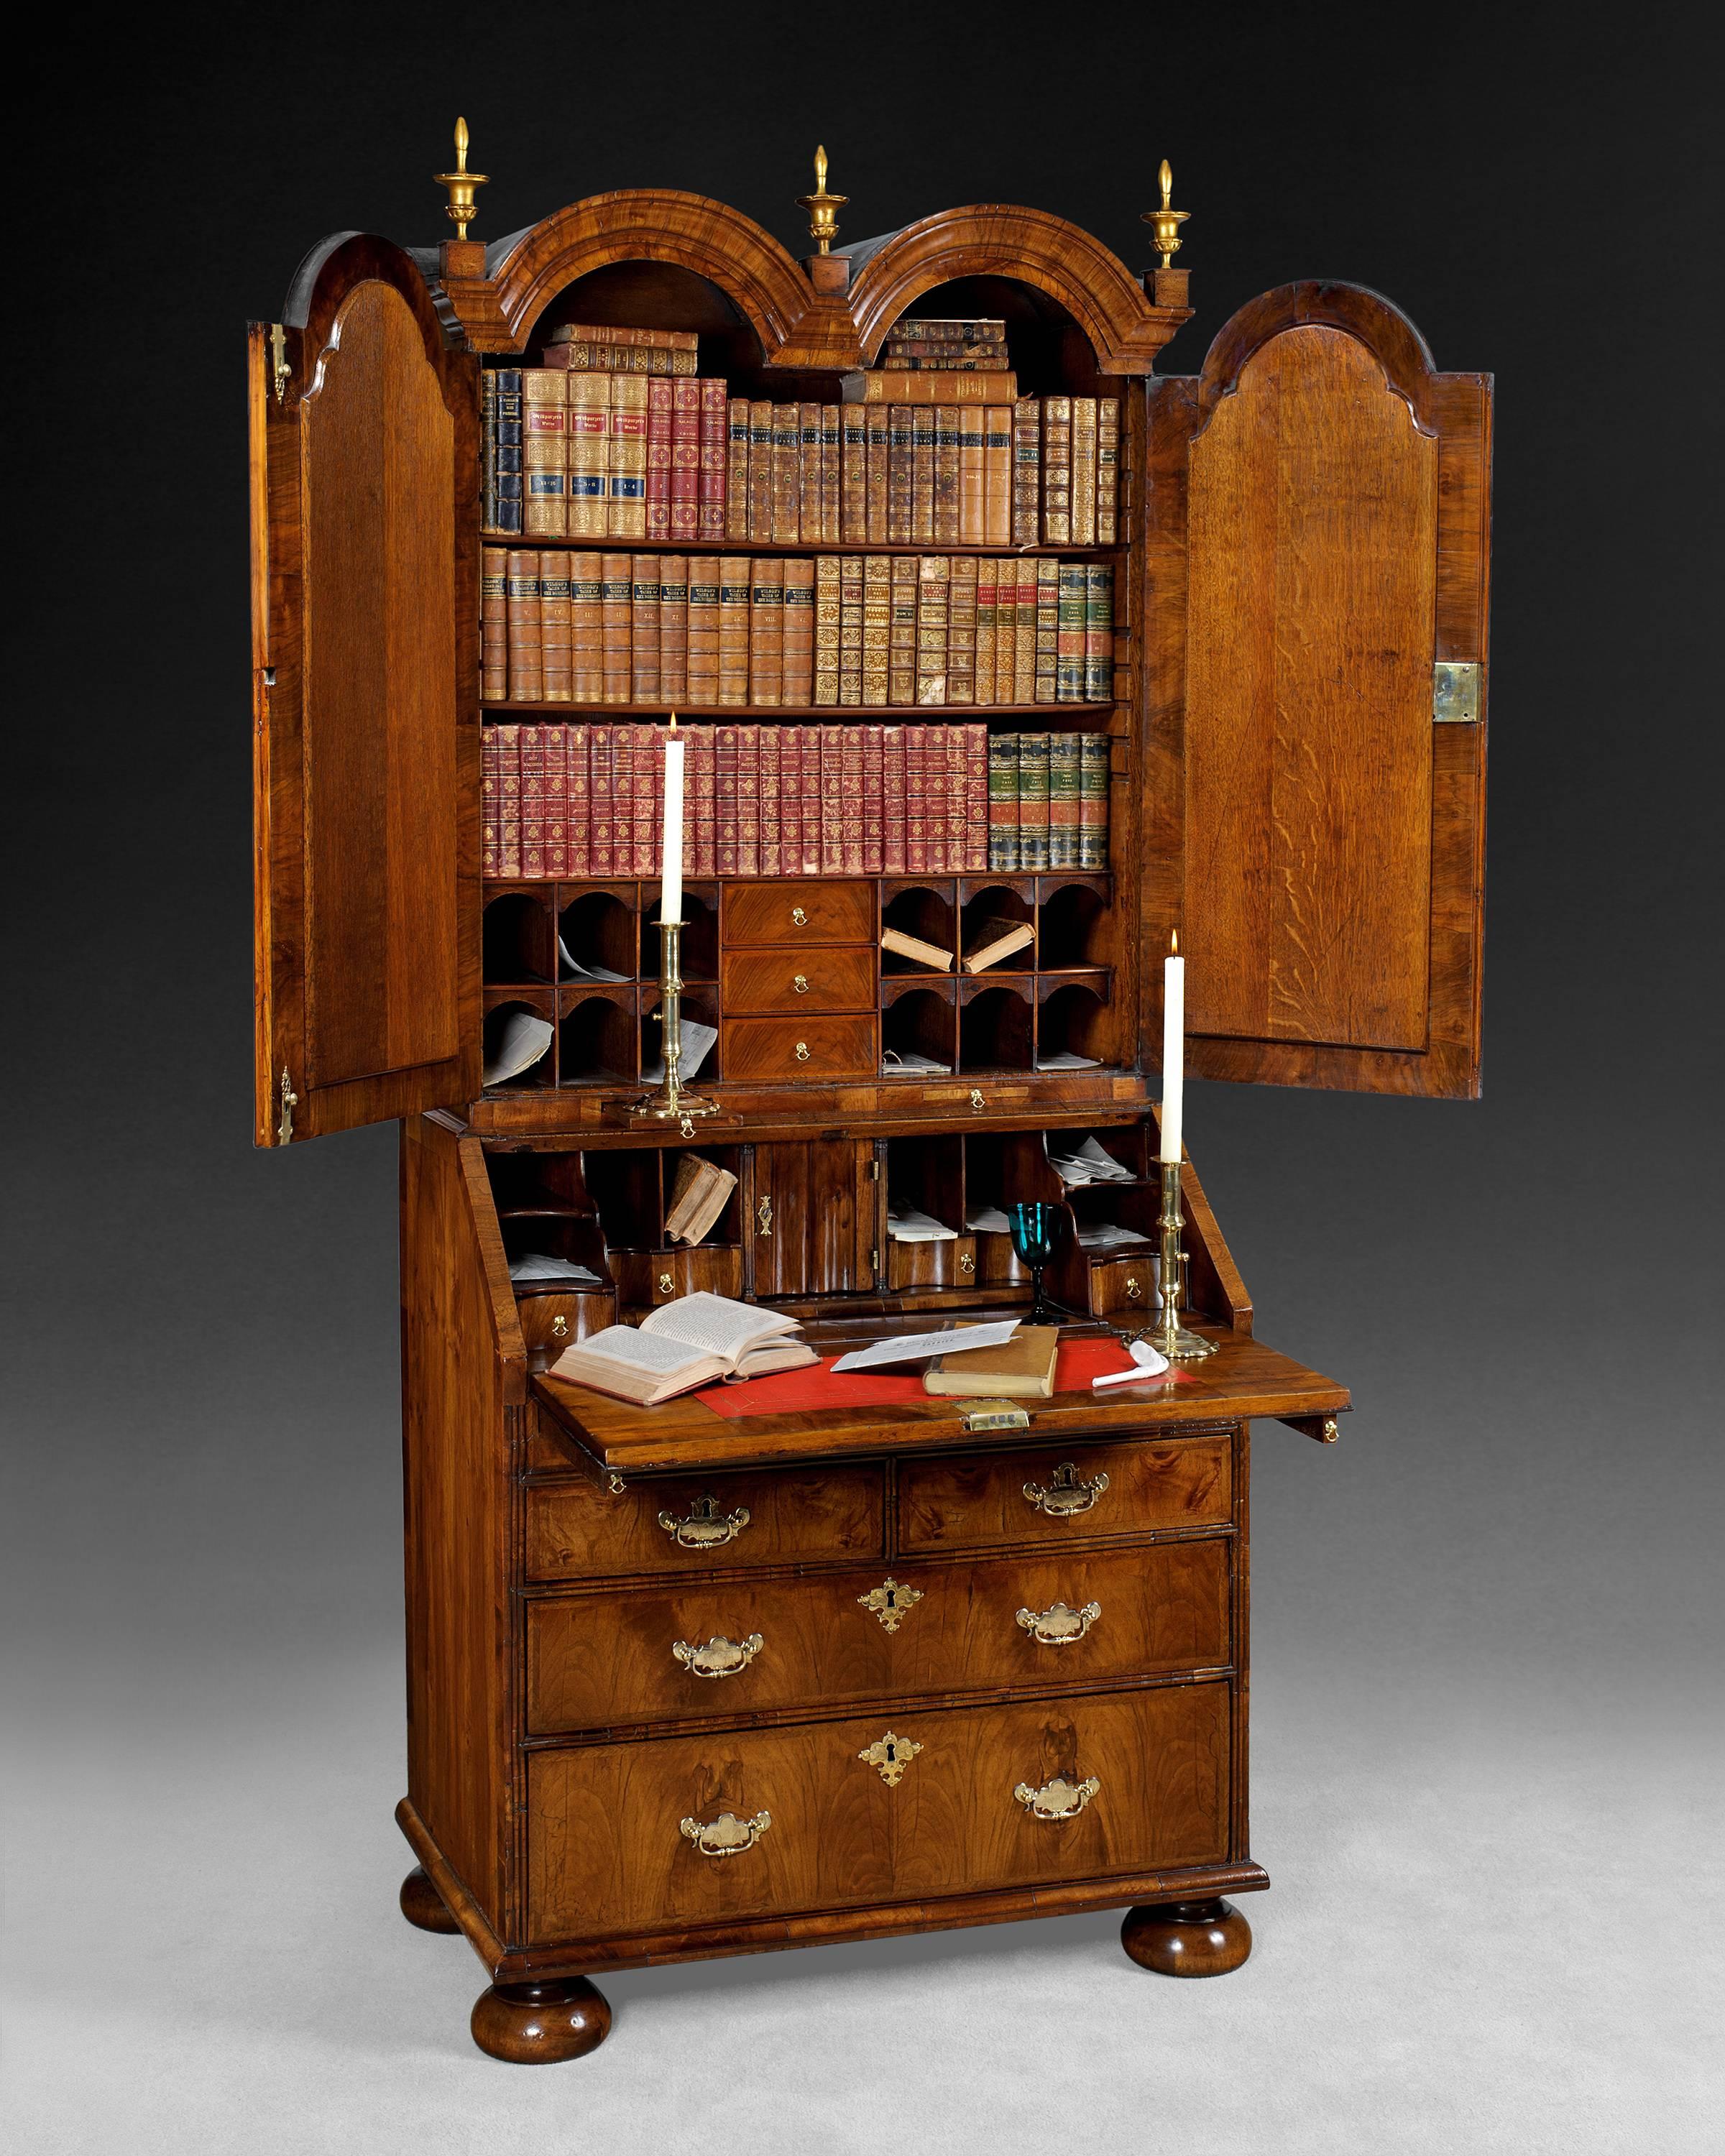 A fine and rare William and Mary period figured walnut double dome top bureau bookcase, the double domes with central and corner flanking carved giltwood finials and the crossbanded sides with domed returns at the top, the conforming doors to the